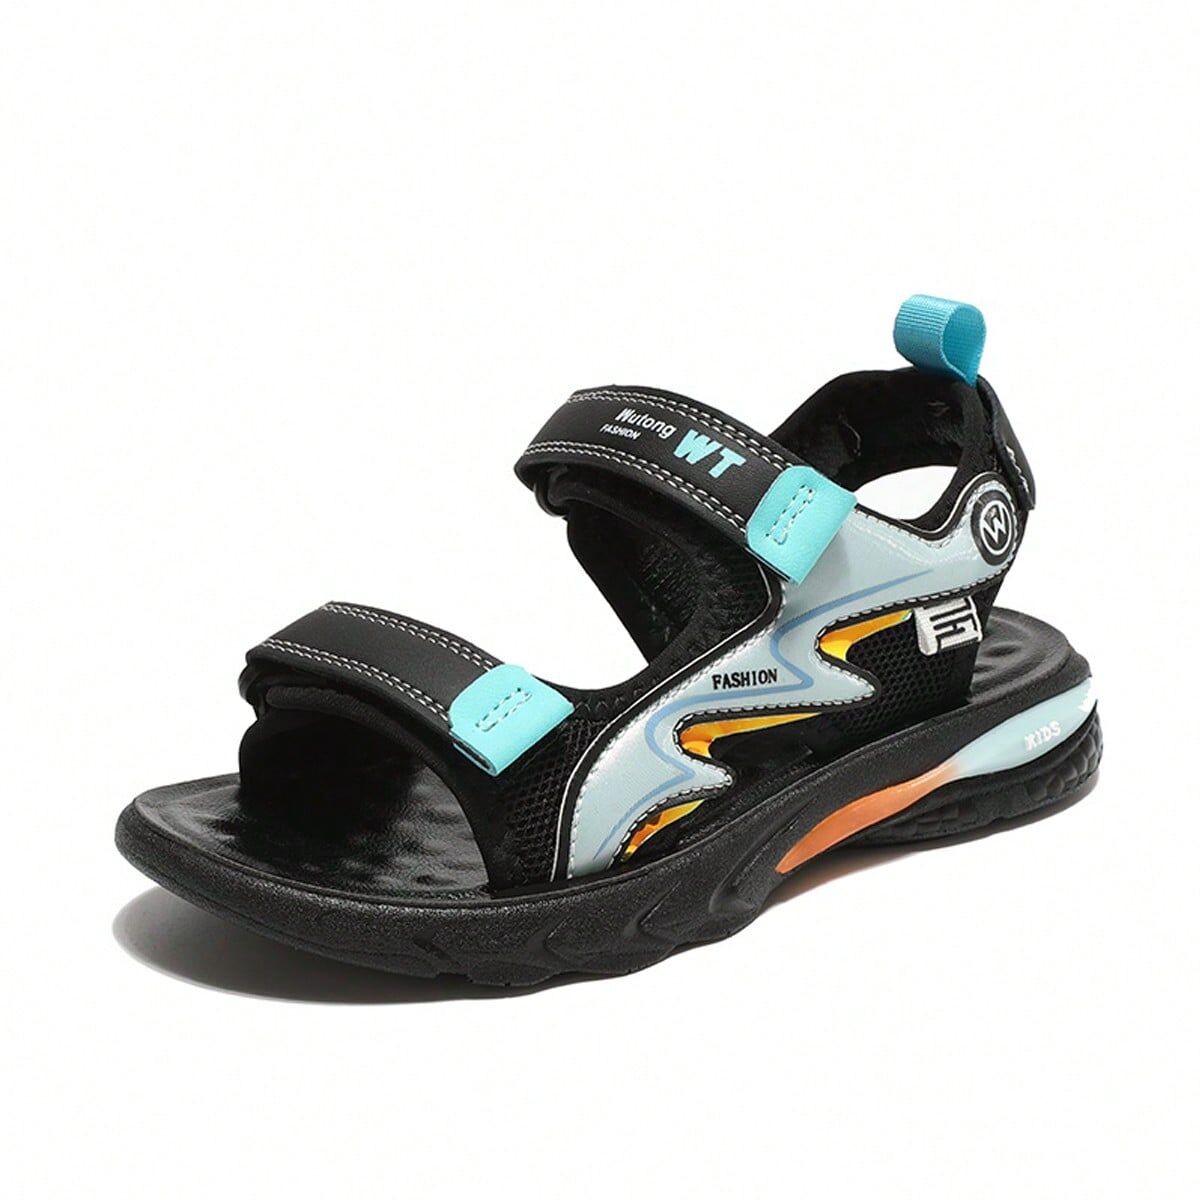 SHEIN Breathable Children'S Beach Shoes For Spring/Summer Outdoor Sports Multicolor EUR34,EUR35,EUR36,EUR37,EUR38,EUR39,EUR40,EUR28,EUR29,EUR30,EUR31,EUR32,EUR33